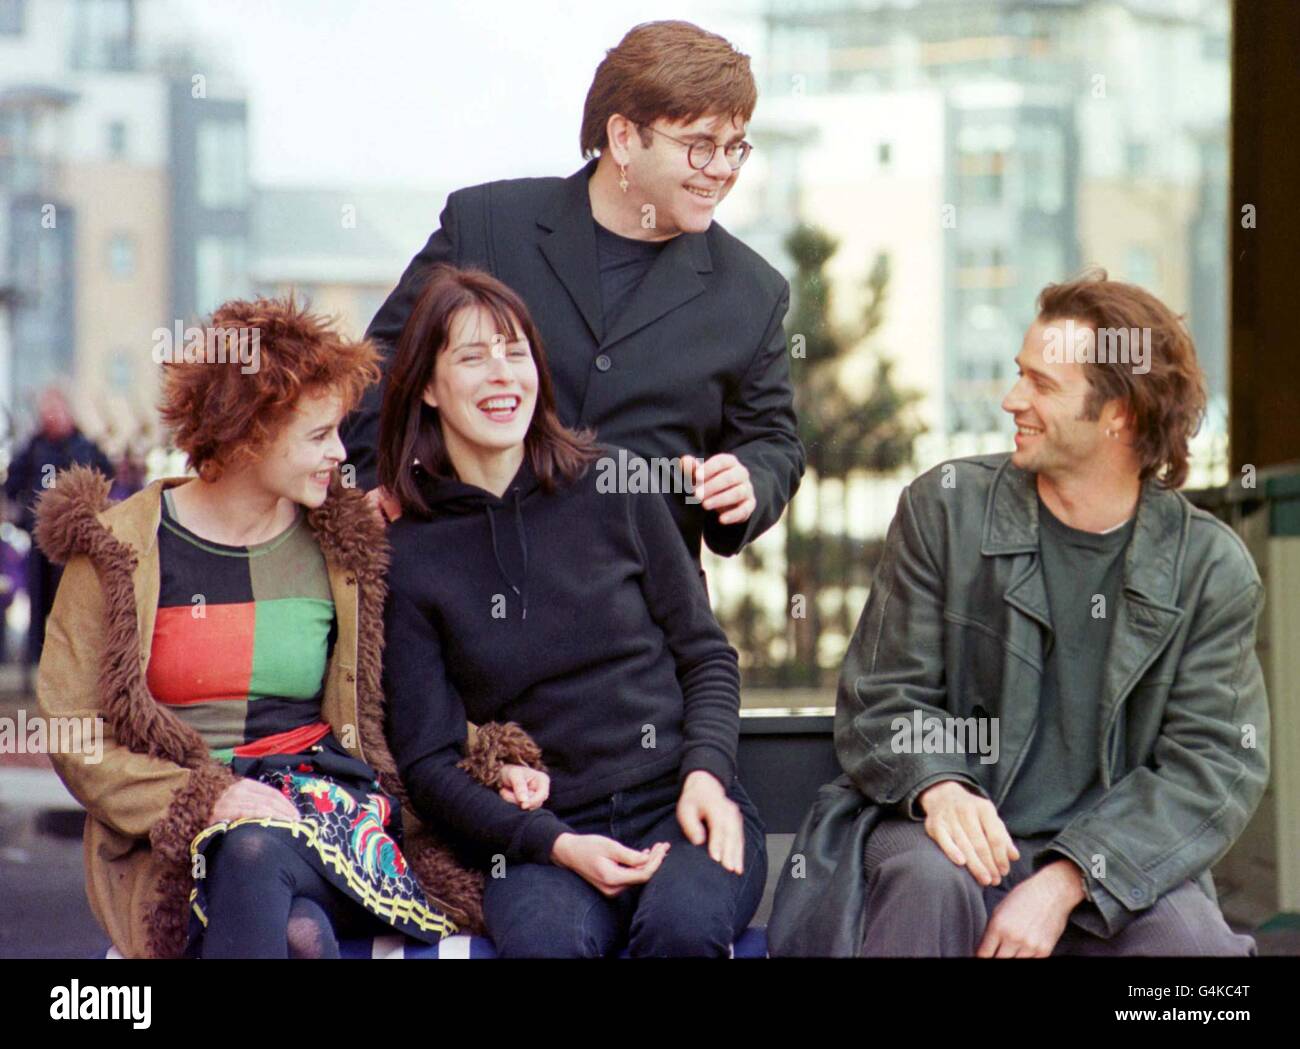 The cast of 'Women Talking Dirty' take a break in filming to meet the press in Edinburgh after filming. Actresses Helena Bonham Carter (L) & Gina McKee look on as pop star Elton John shares a joke with actor James Purefoy (R). Stock Photo